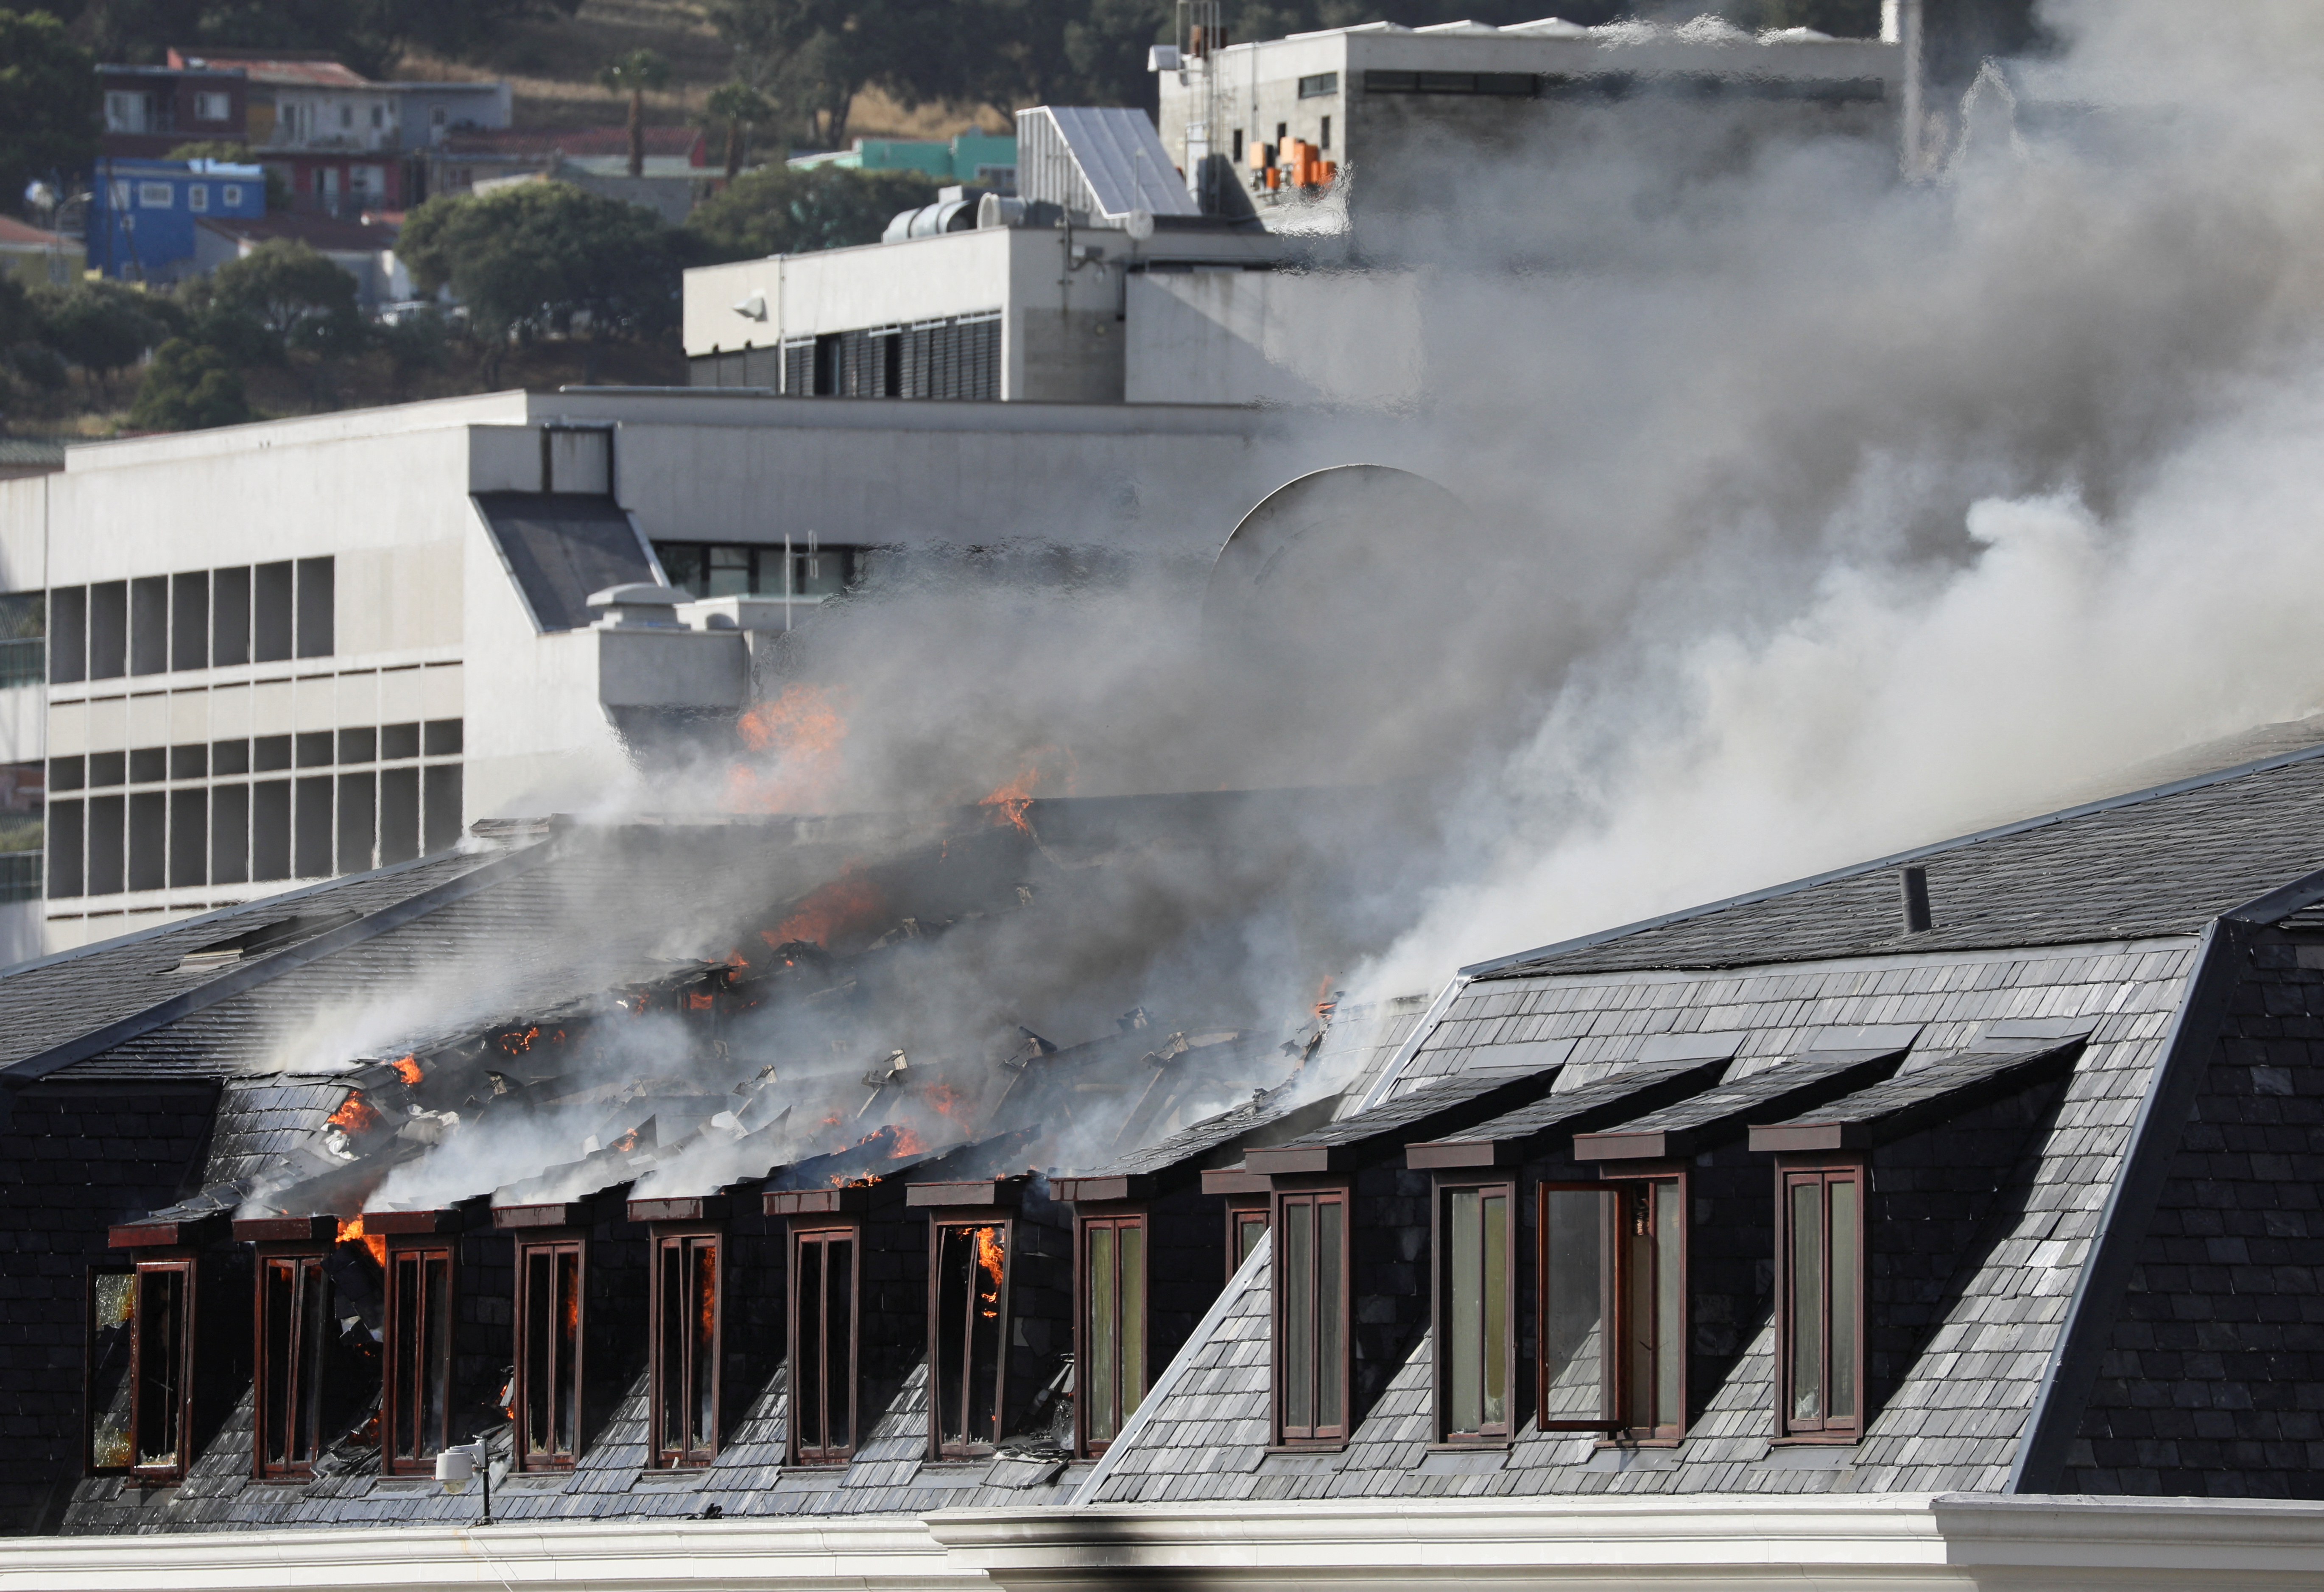 Flames and smoke rise over a roof as the fire at the parliament flared up again, in Cape Town, South Africa, January 3, 2022. REUTERS/Sumaya Hisham